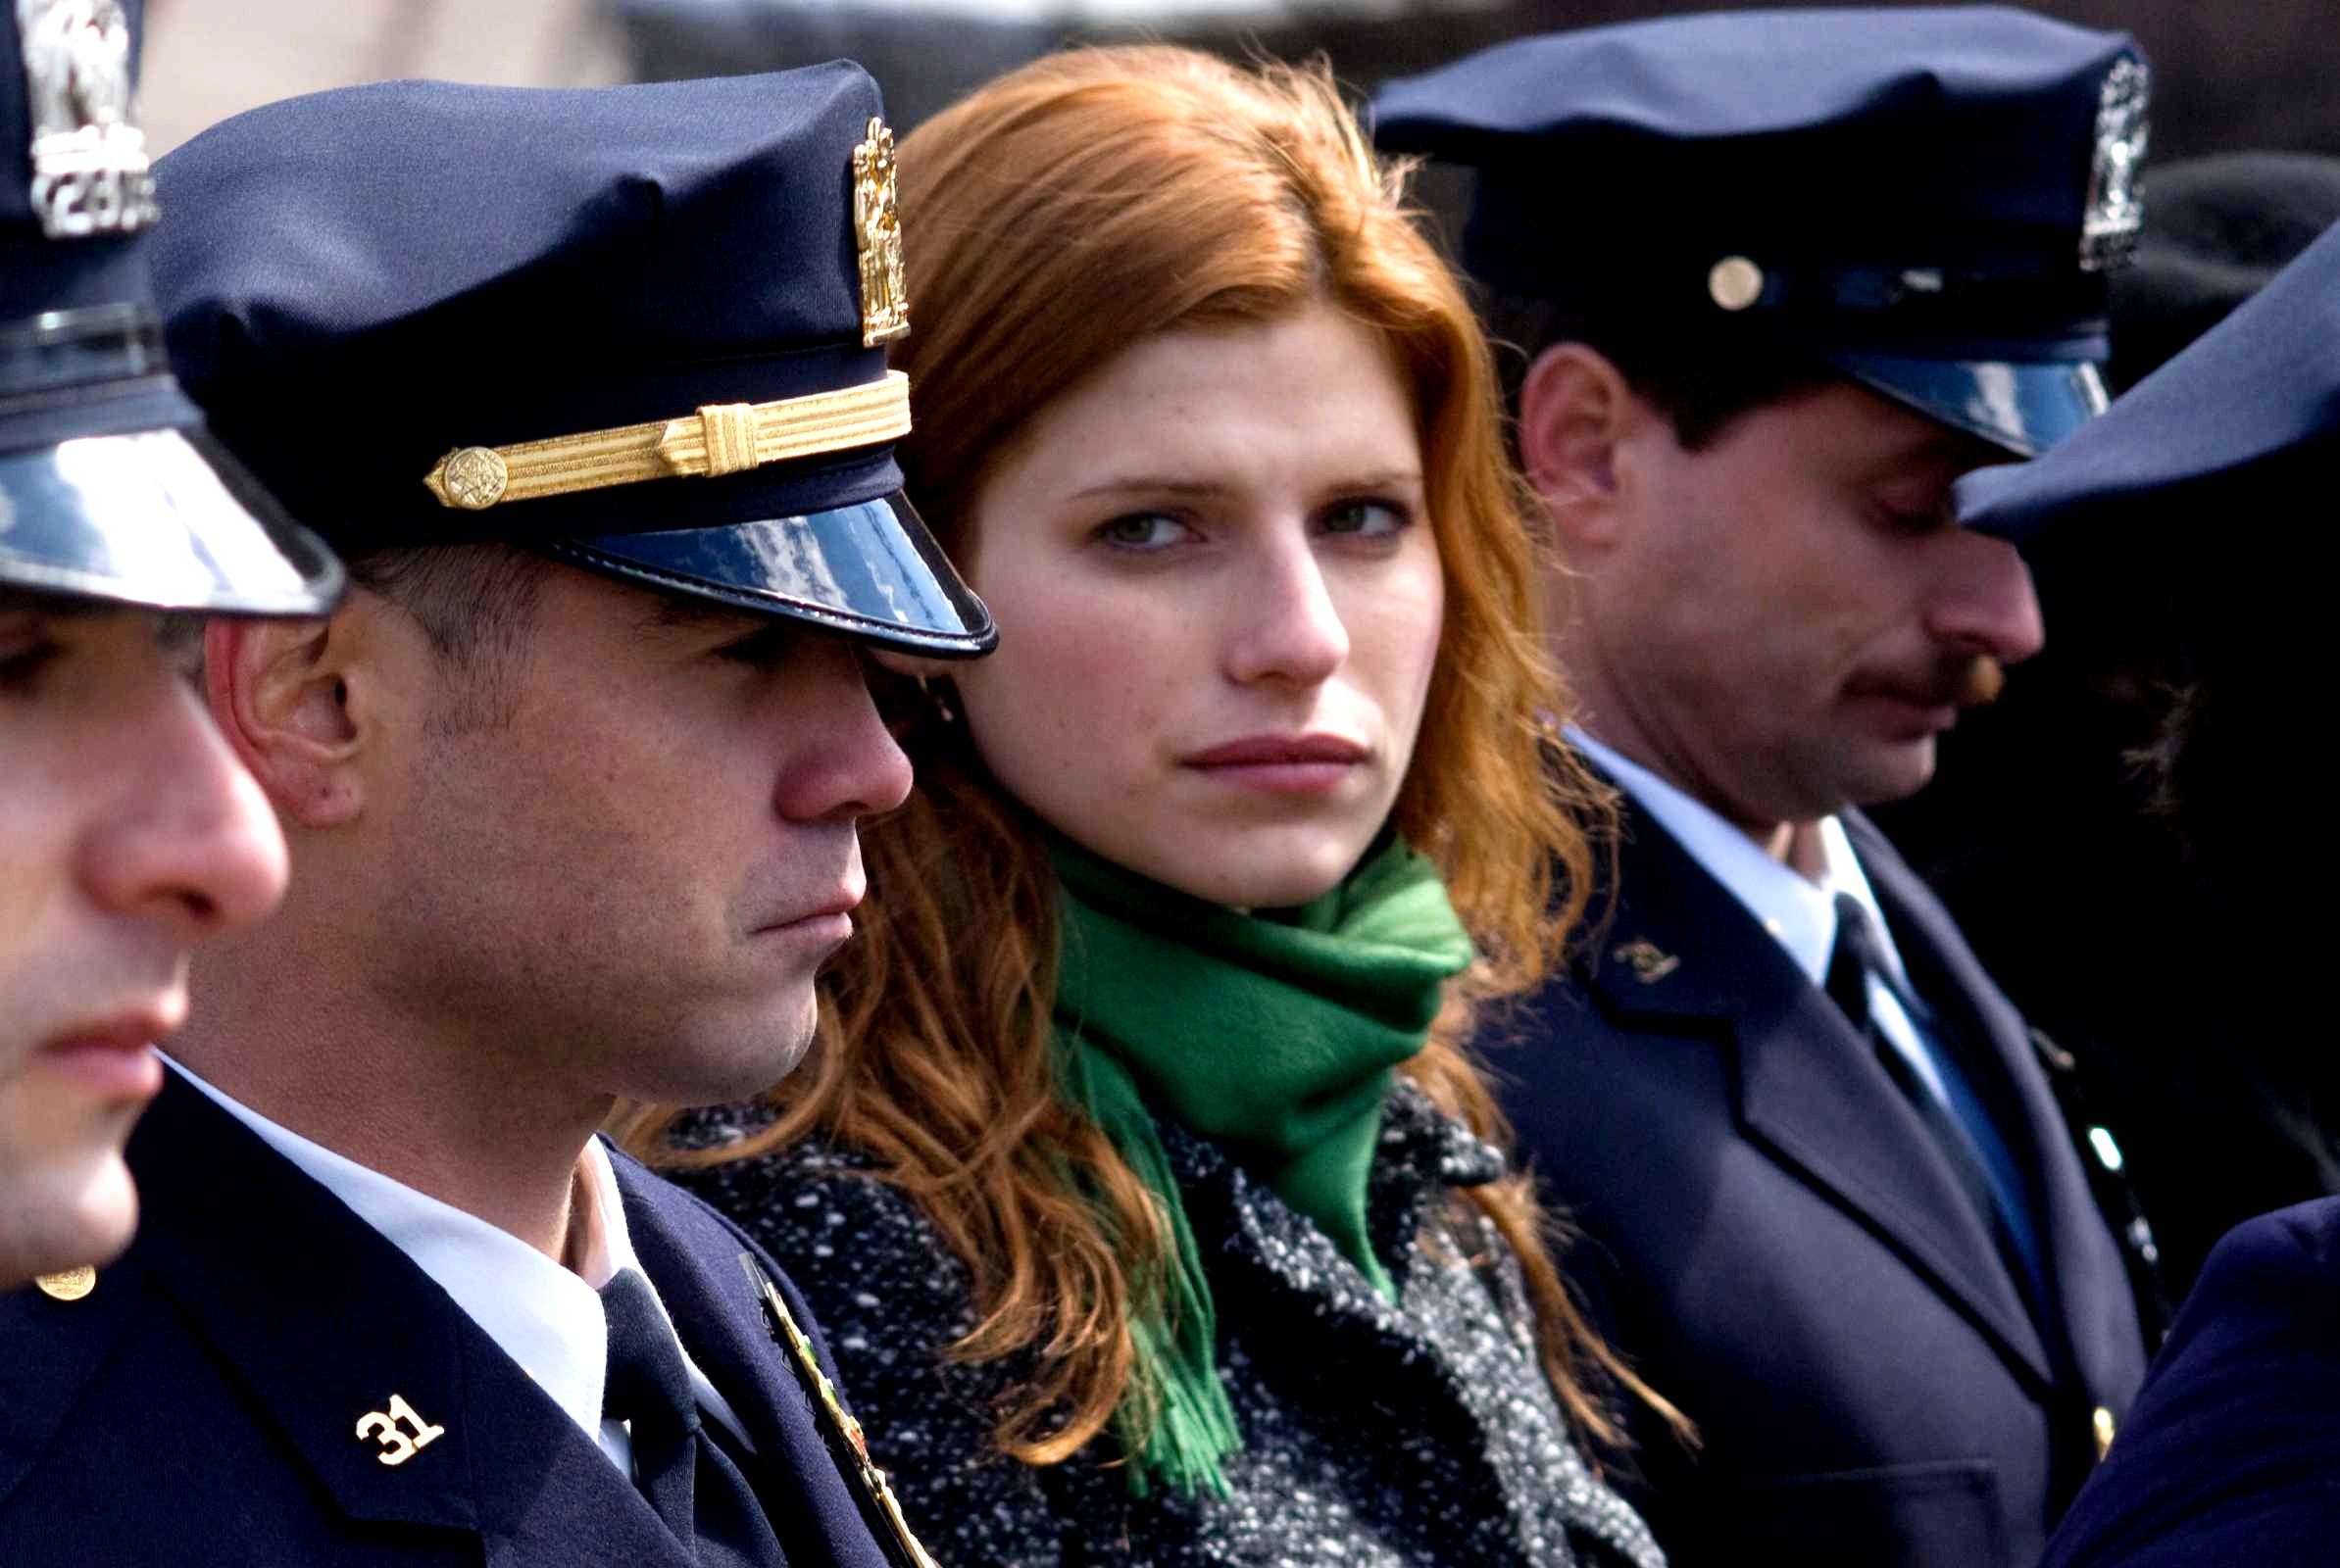 Colin Farrell stars as Jimmy Egan and Lake Bell stars as Megan Egan in New Line Cinema's Pride and Glory (2008). Photo credit by Glen Wilson.